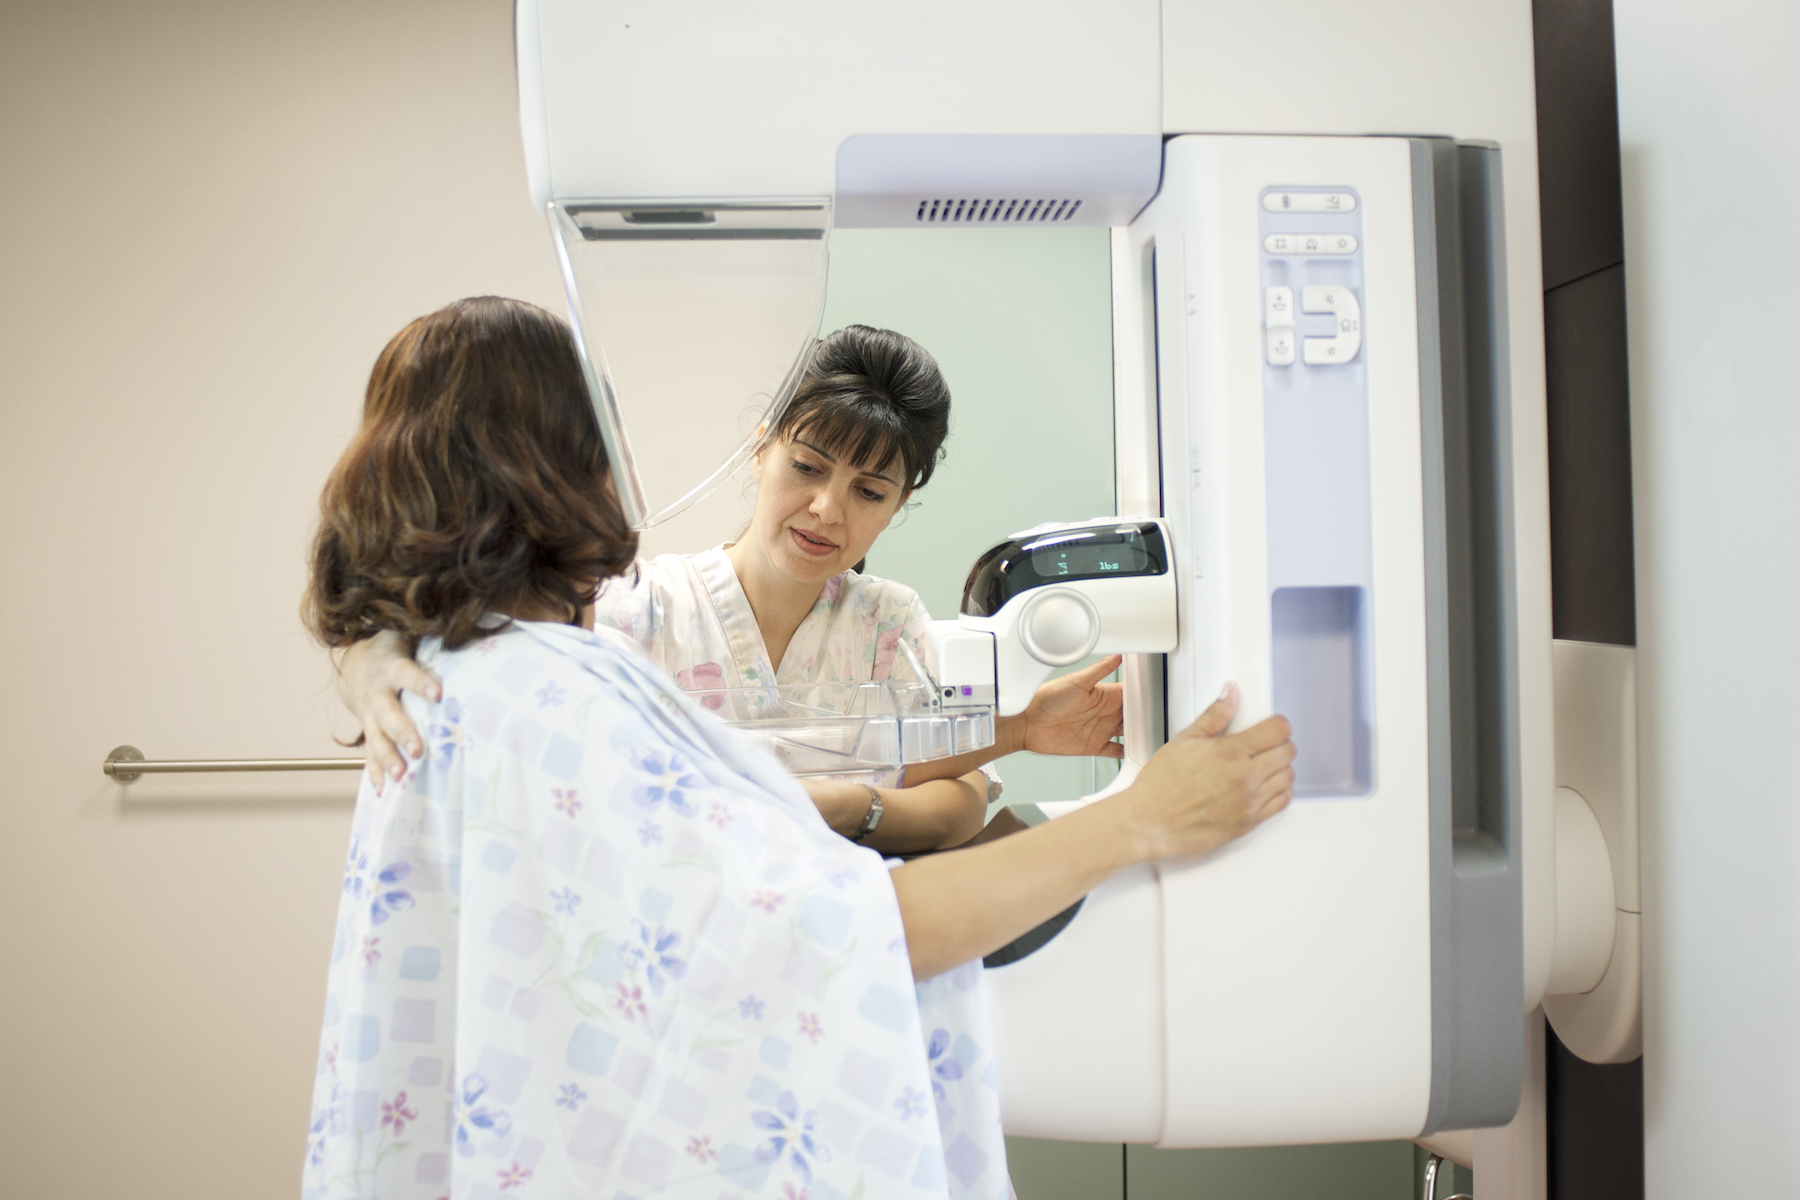 A nurse performs a mammogram, the patient is holding onto the imagery machine with head turned away from the camera